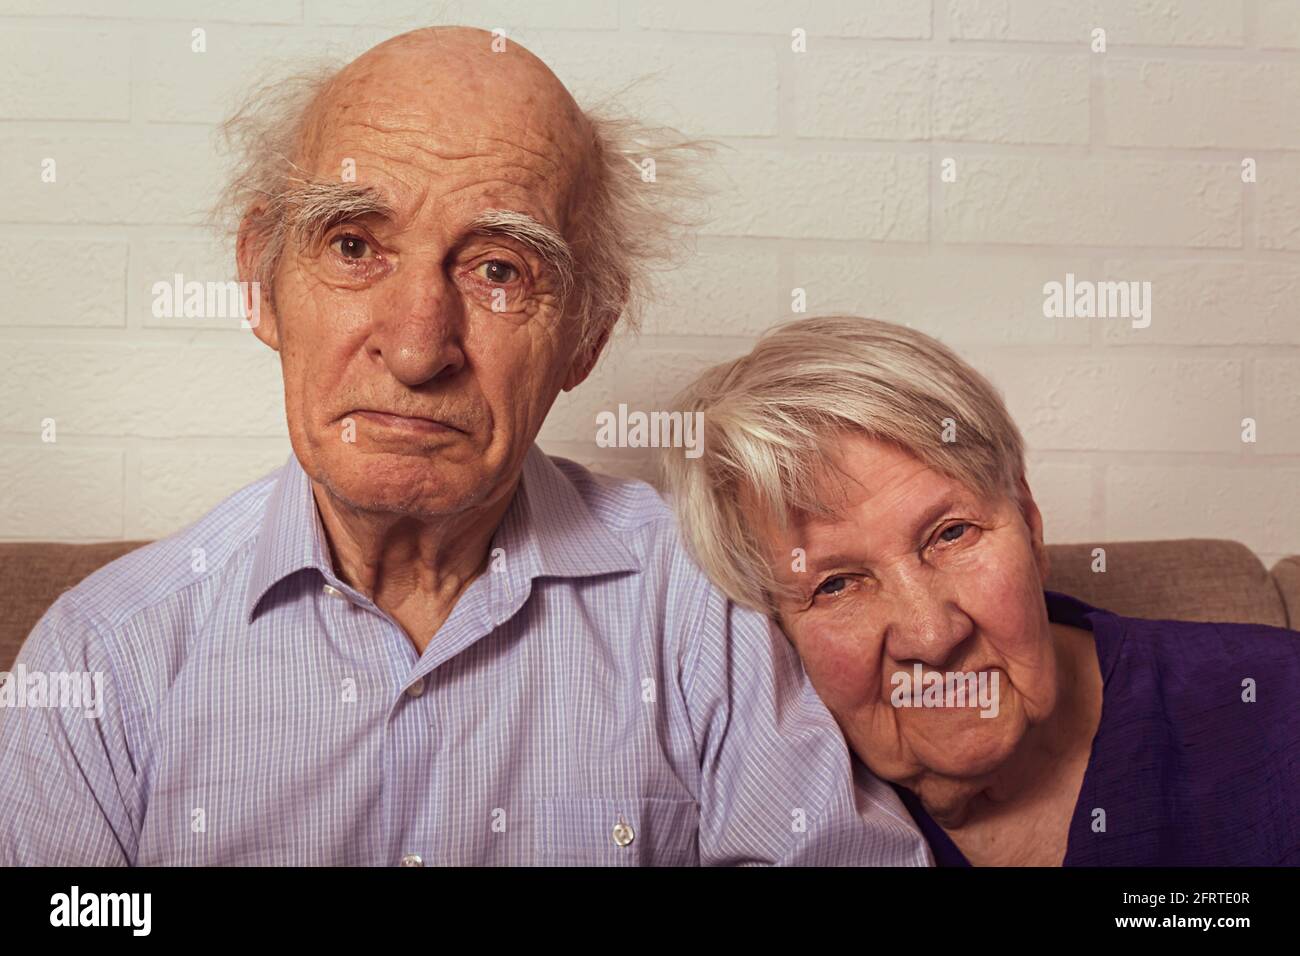 Very old grandma and grandpa cuddling on couch. Love in old age. Wife puts her head on husband's shoulder. Elderly people.  Stock Photo